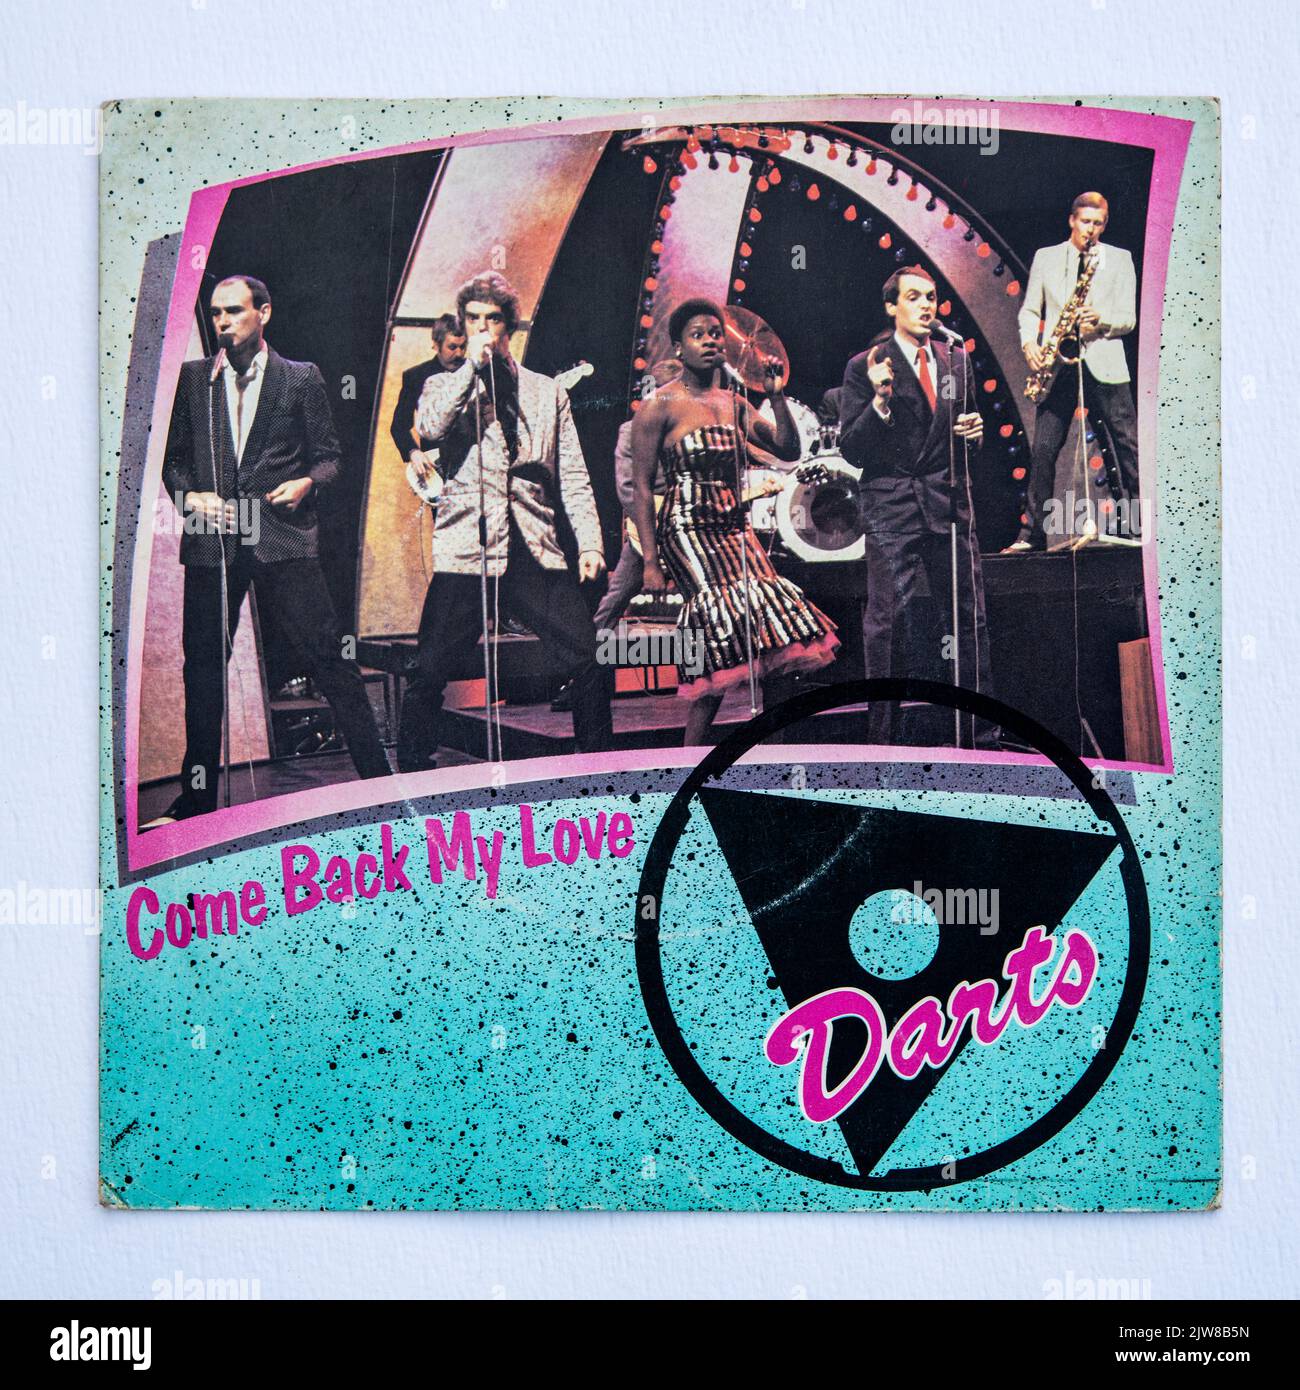 Picture cover of the seven inch single version of Come Back My Love by Darts, which was released in 1978. Stock Photo